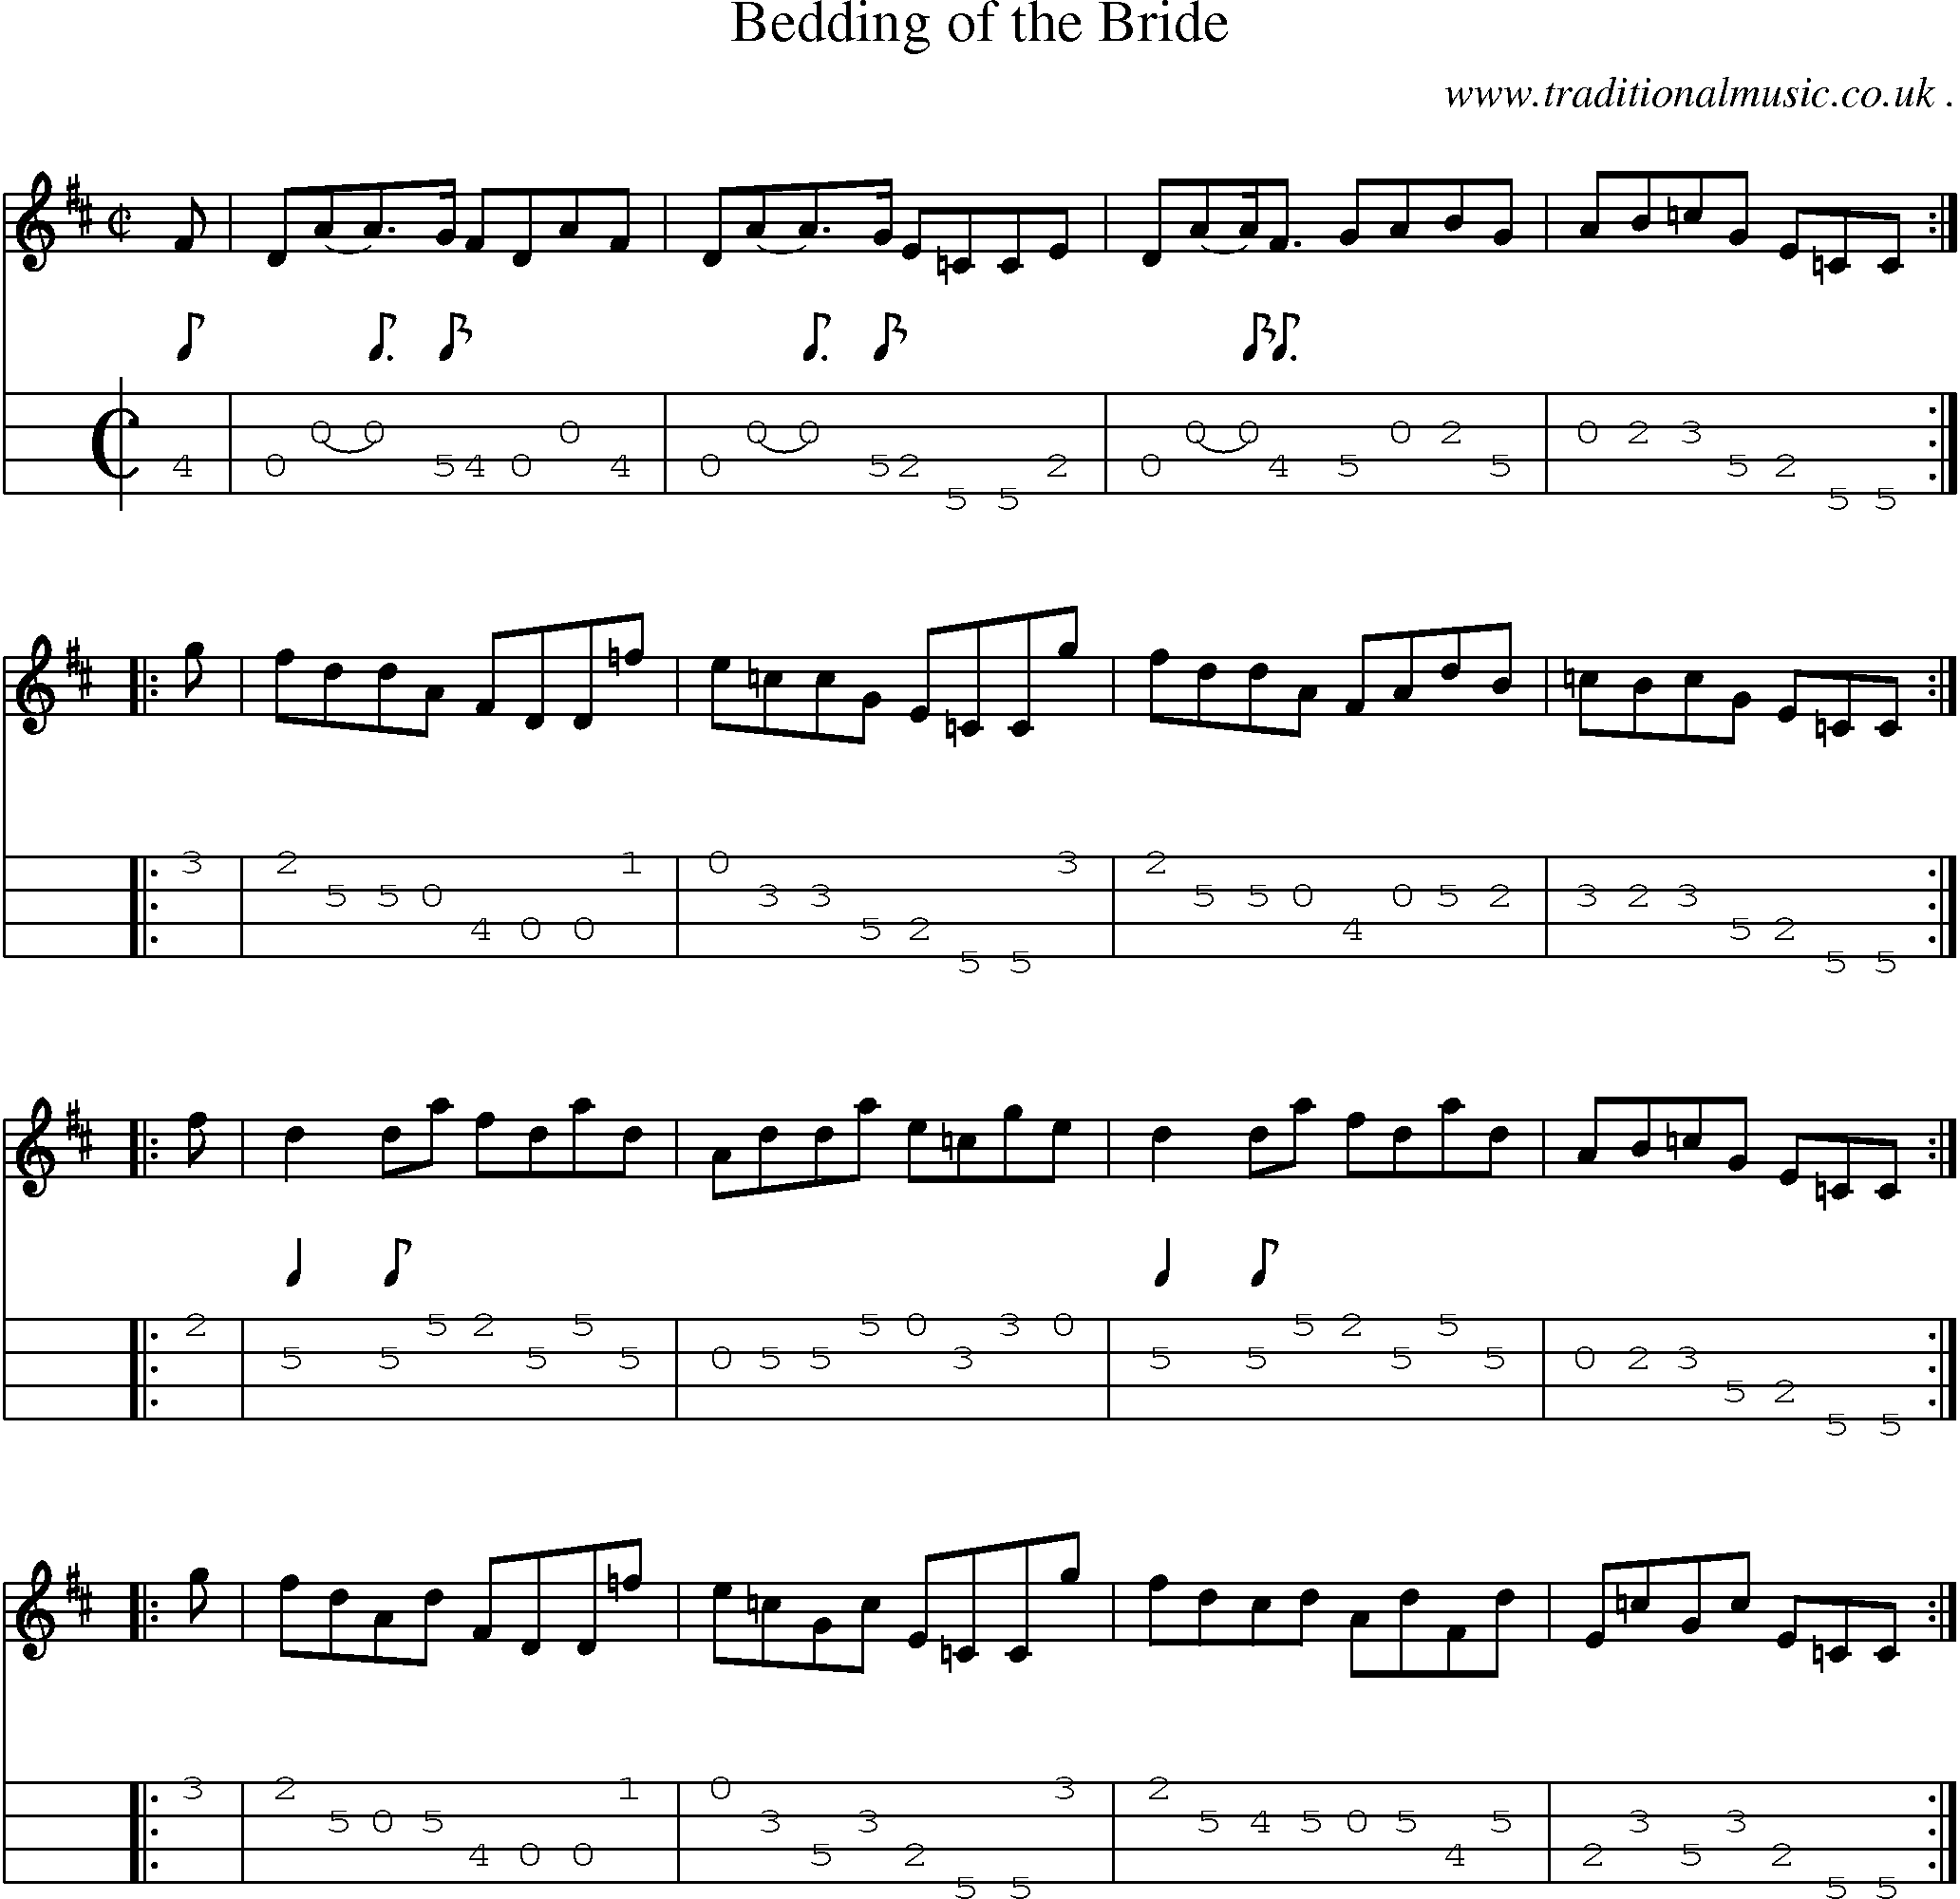 Sheet-music  score, Chords and Mandolin Tabs for Bedding Of The Bride